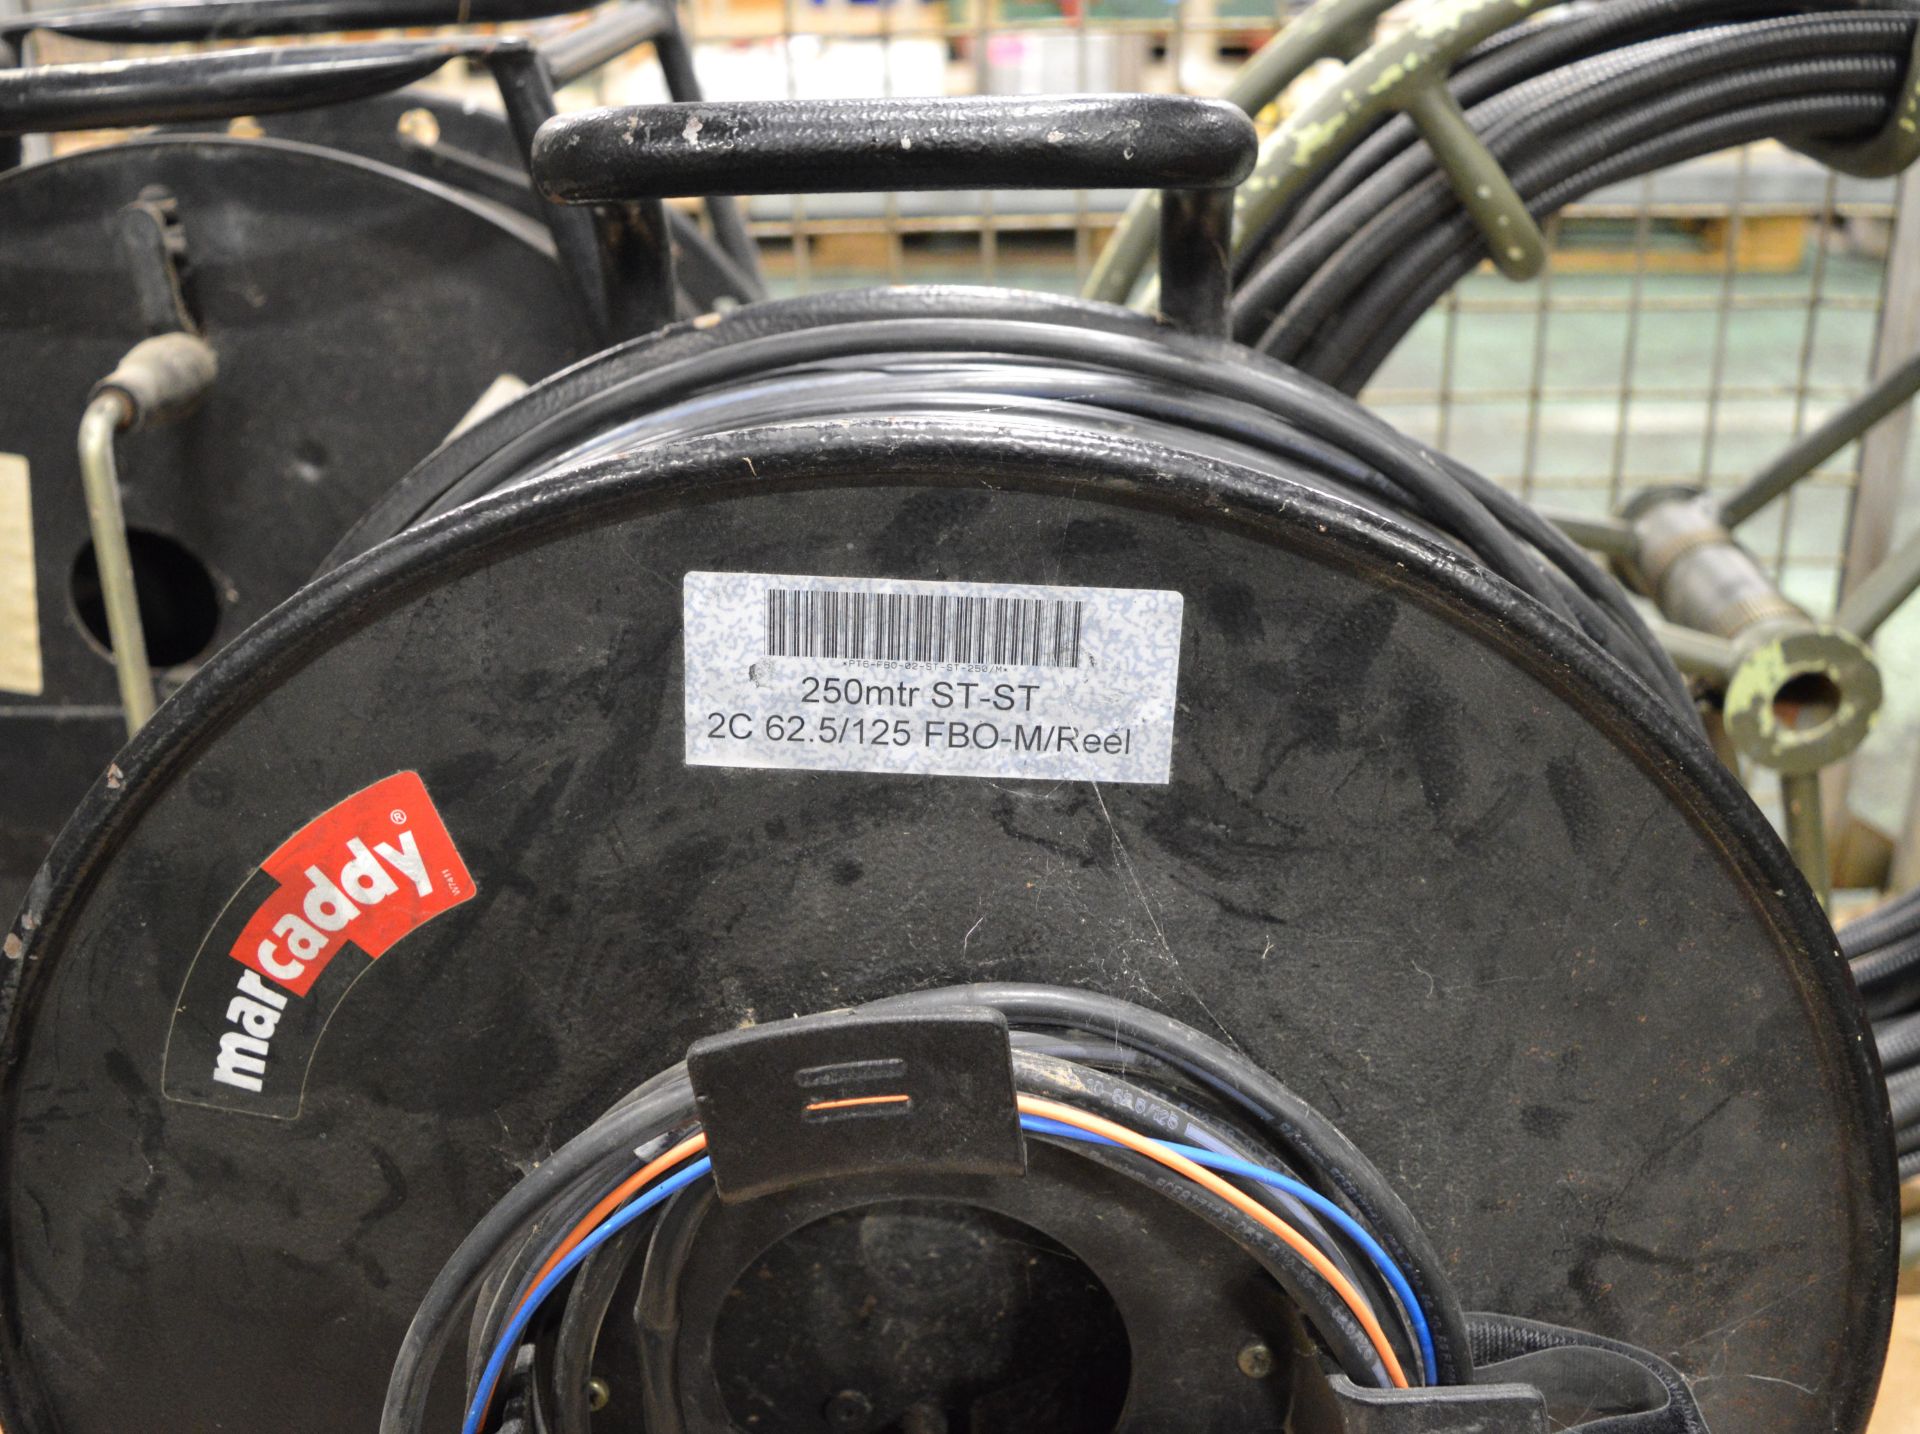 3x Cable Reels - Up to 250m. - Image 2 of 2